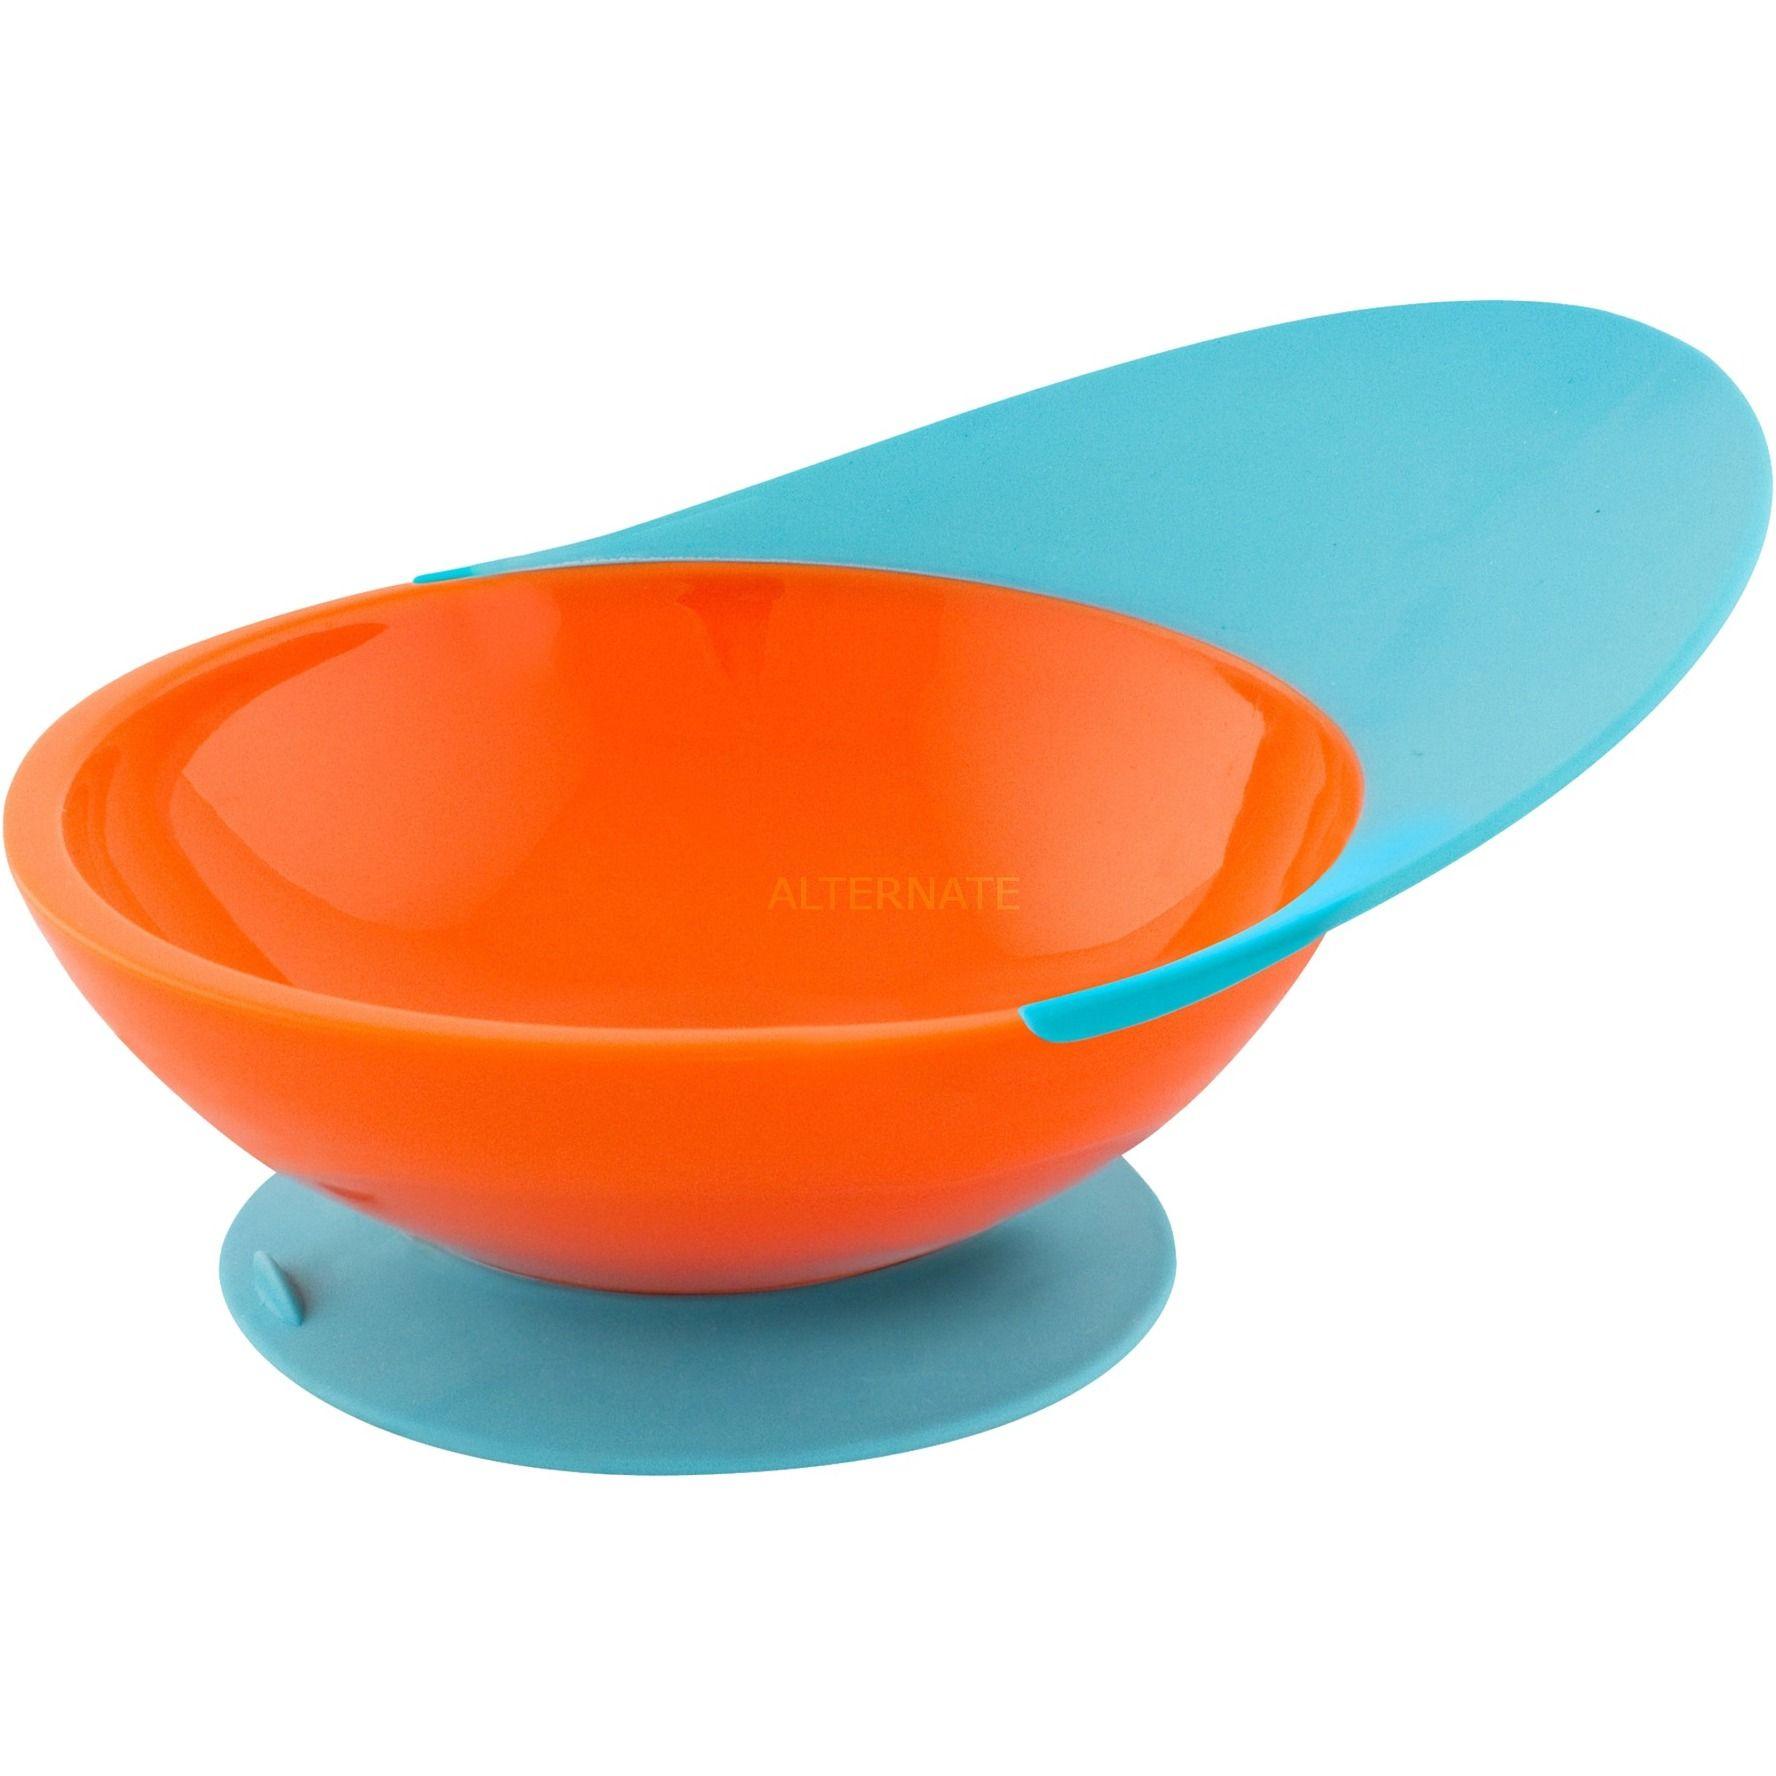 Orange and Blue 76 Logo - Tomy Catch Bowl 9month(s) Blue, Orange, Dishes Blue Orange, Blue